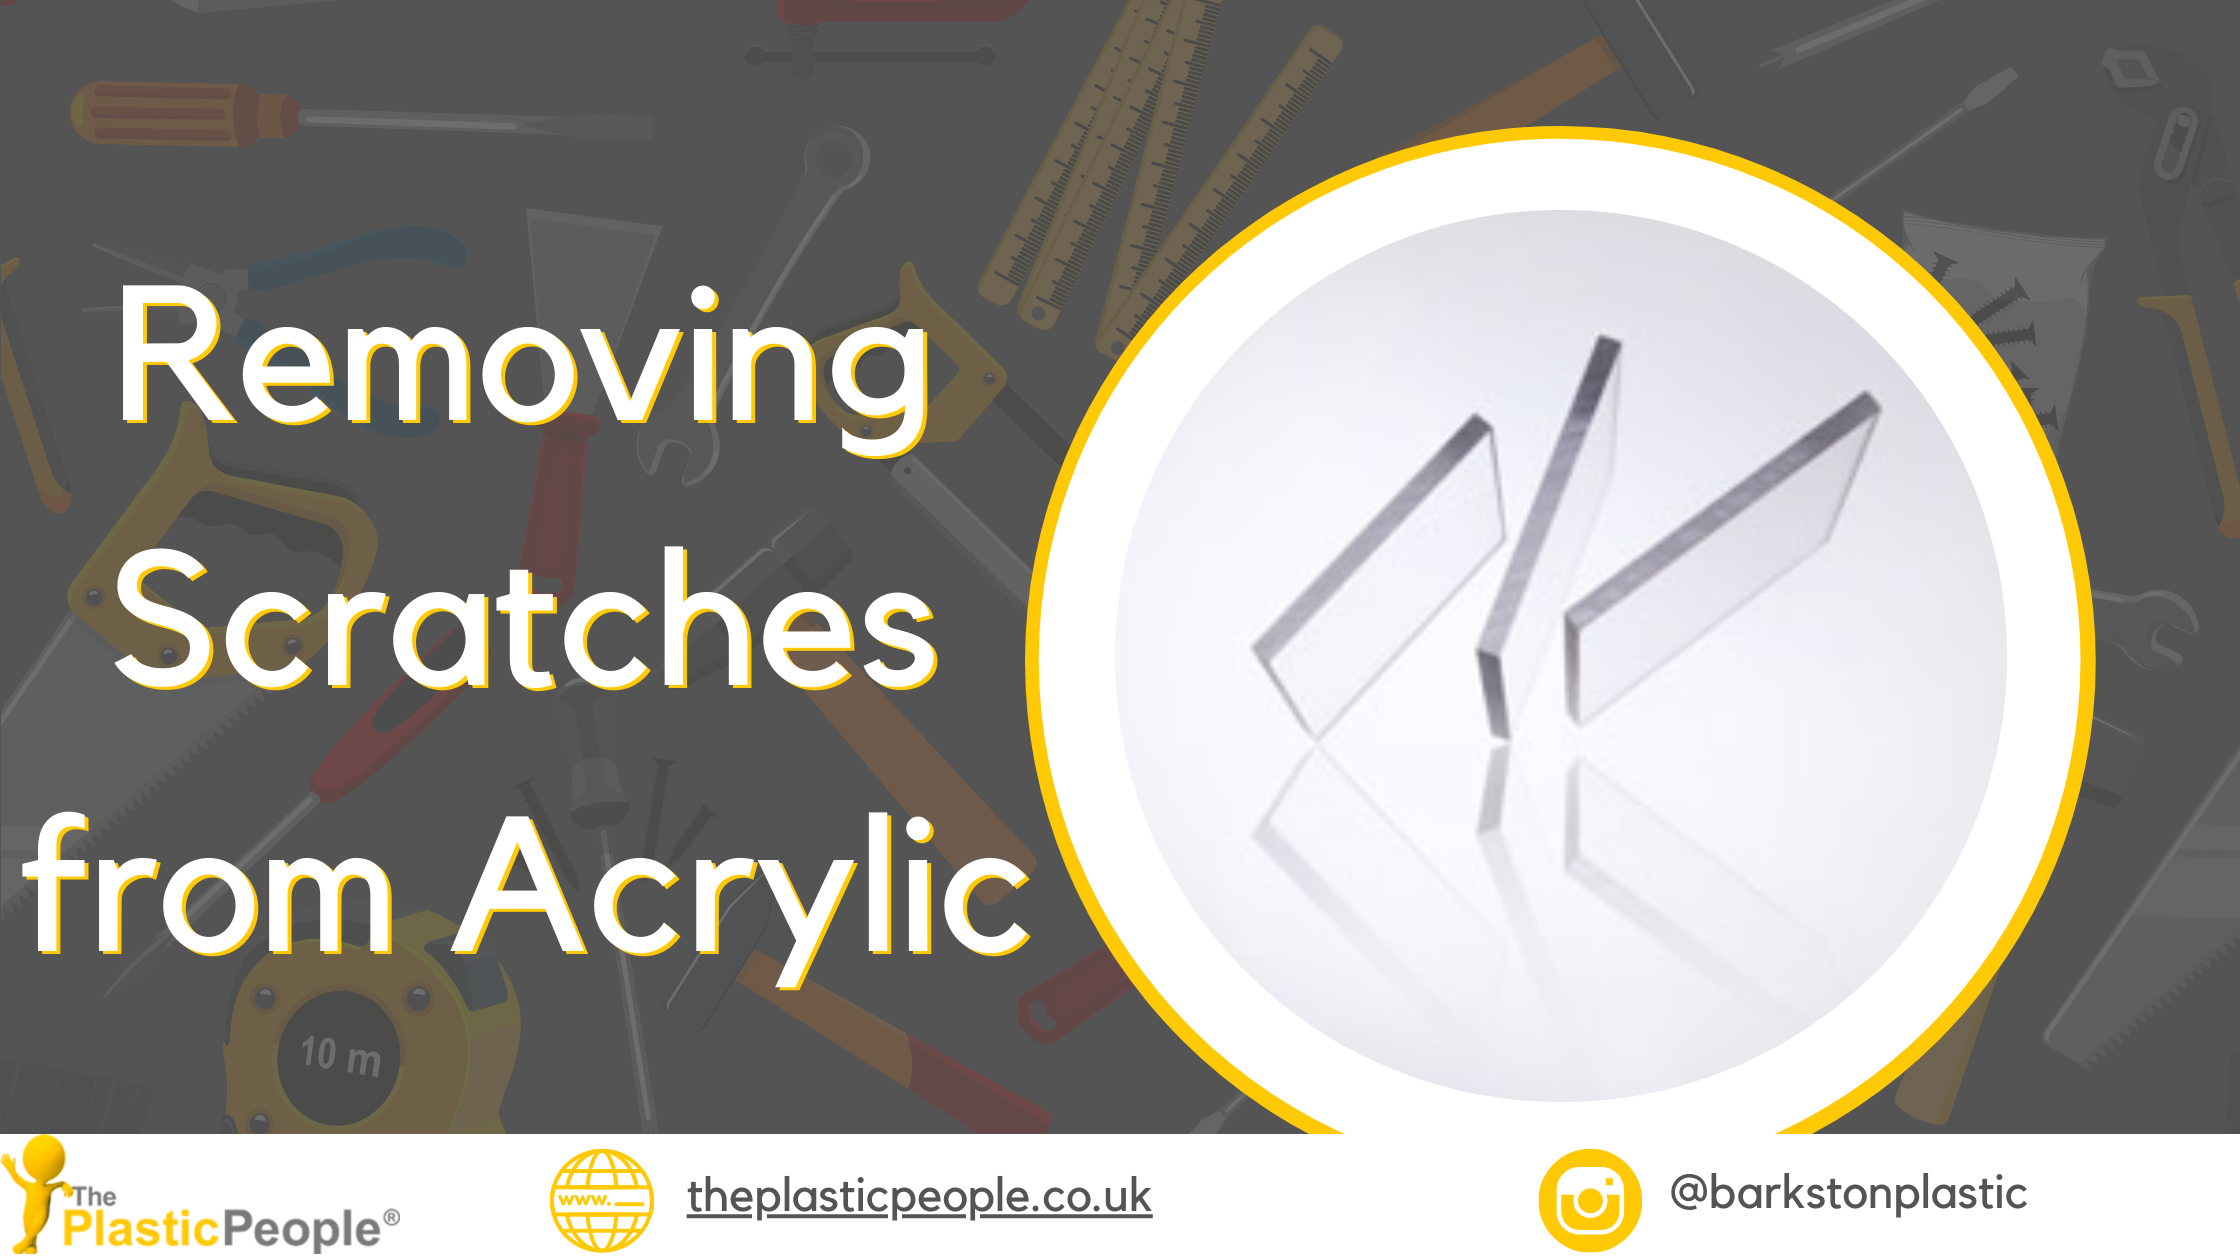 How To Remove Scratches From Glasses - Online Opticians UK - Blog